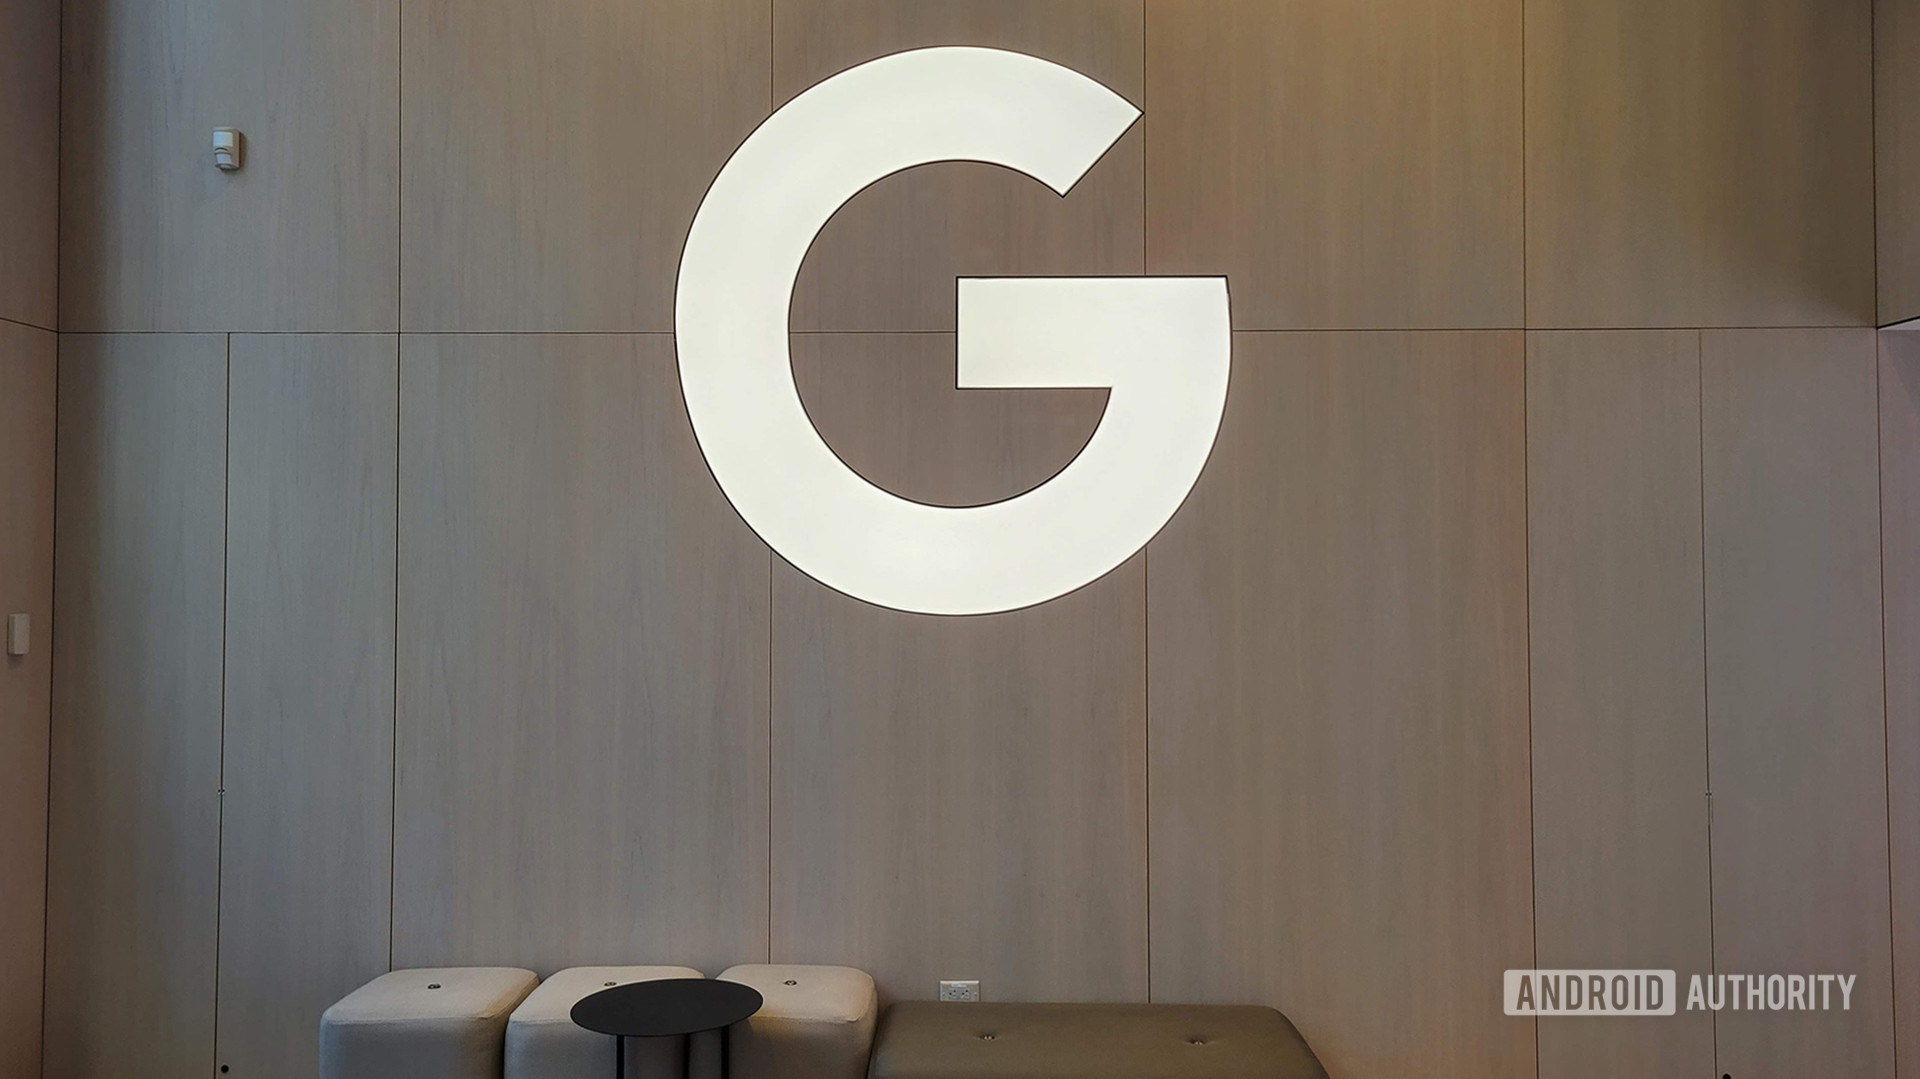 Rumor suggests Google is still working on a foldable, likely to come in 2023